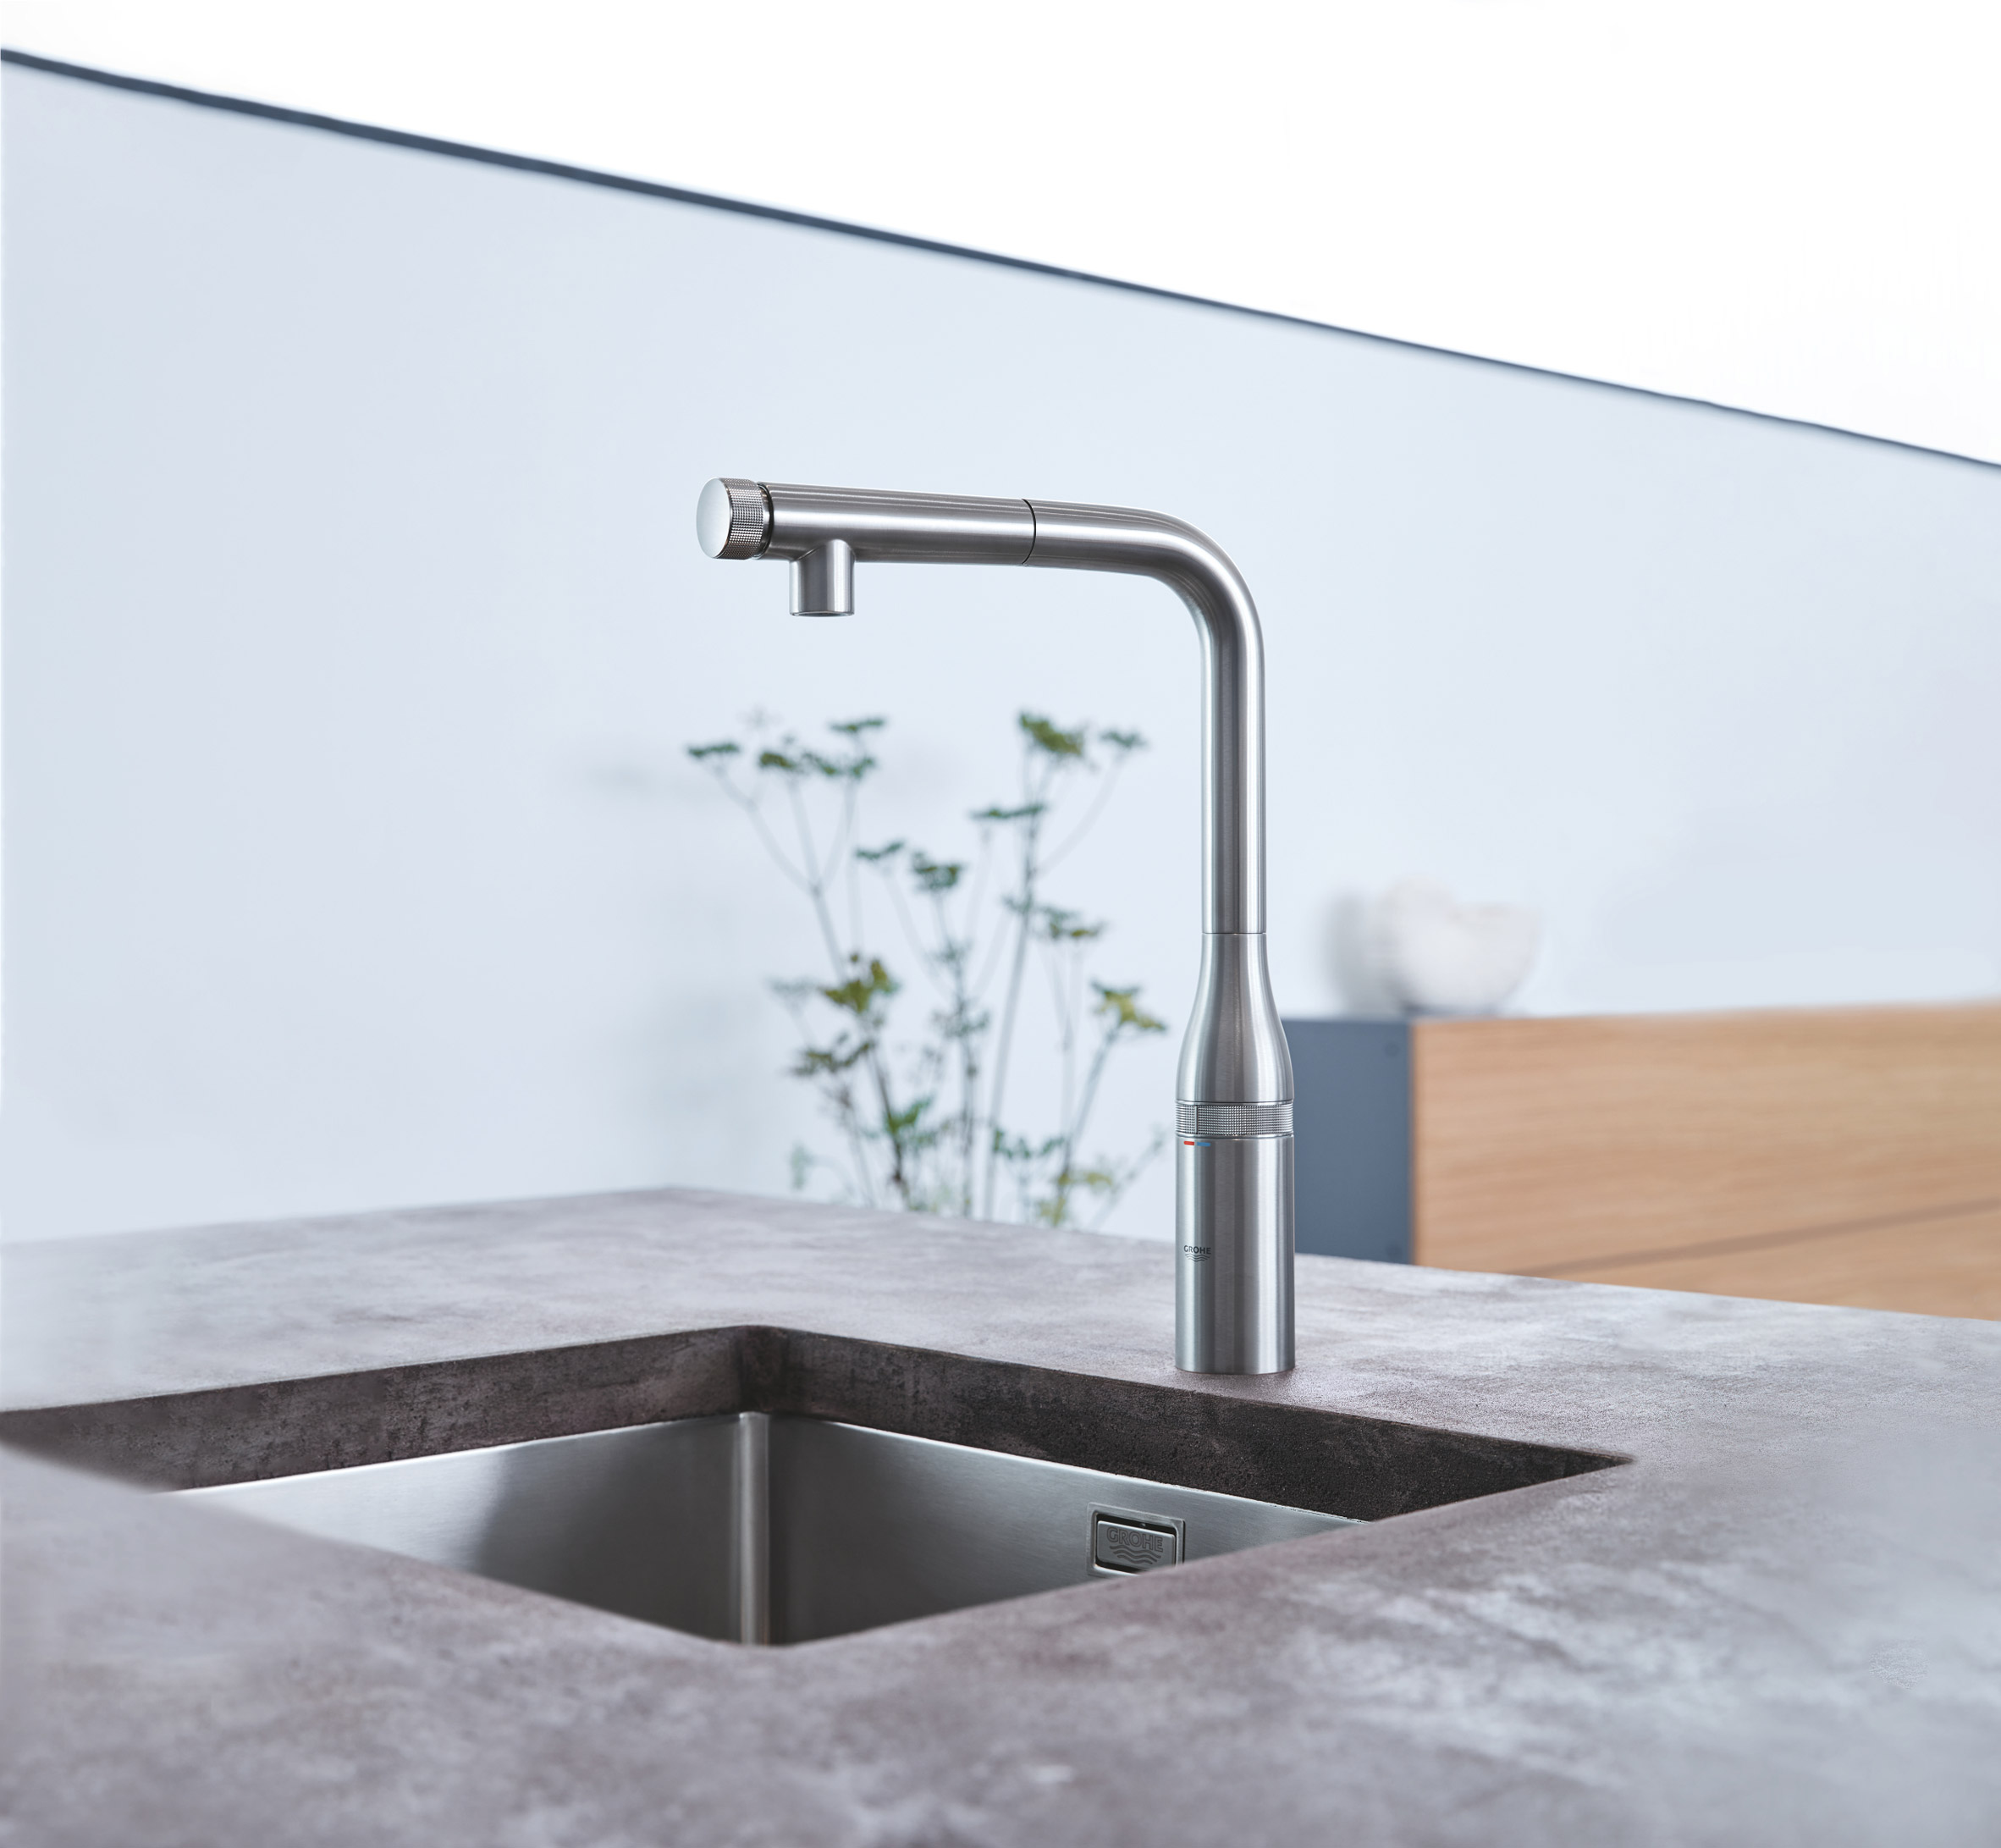 "Consumers want touchless products to limit spread of germs" says Grohe's Patrick Speck